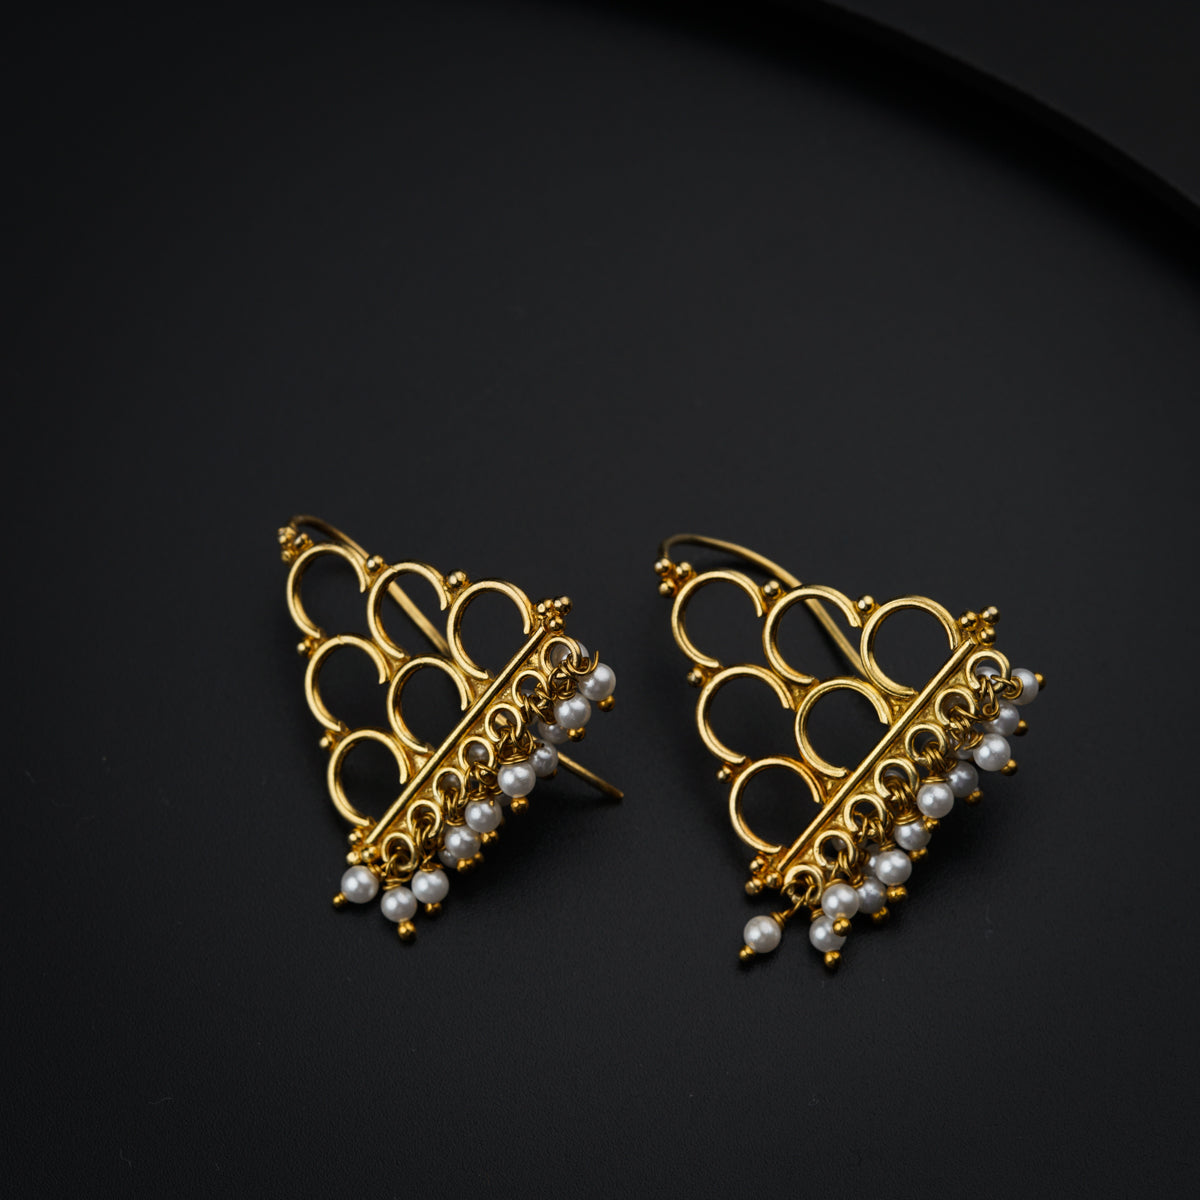 Filigree Pyramid Earrings: Hook Style (Gold Plated)